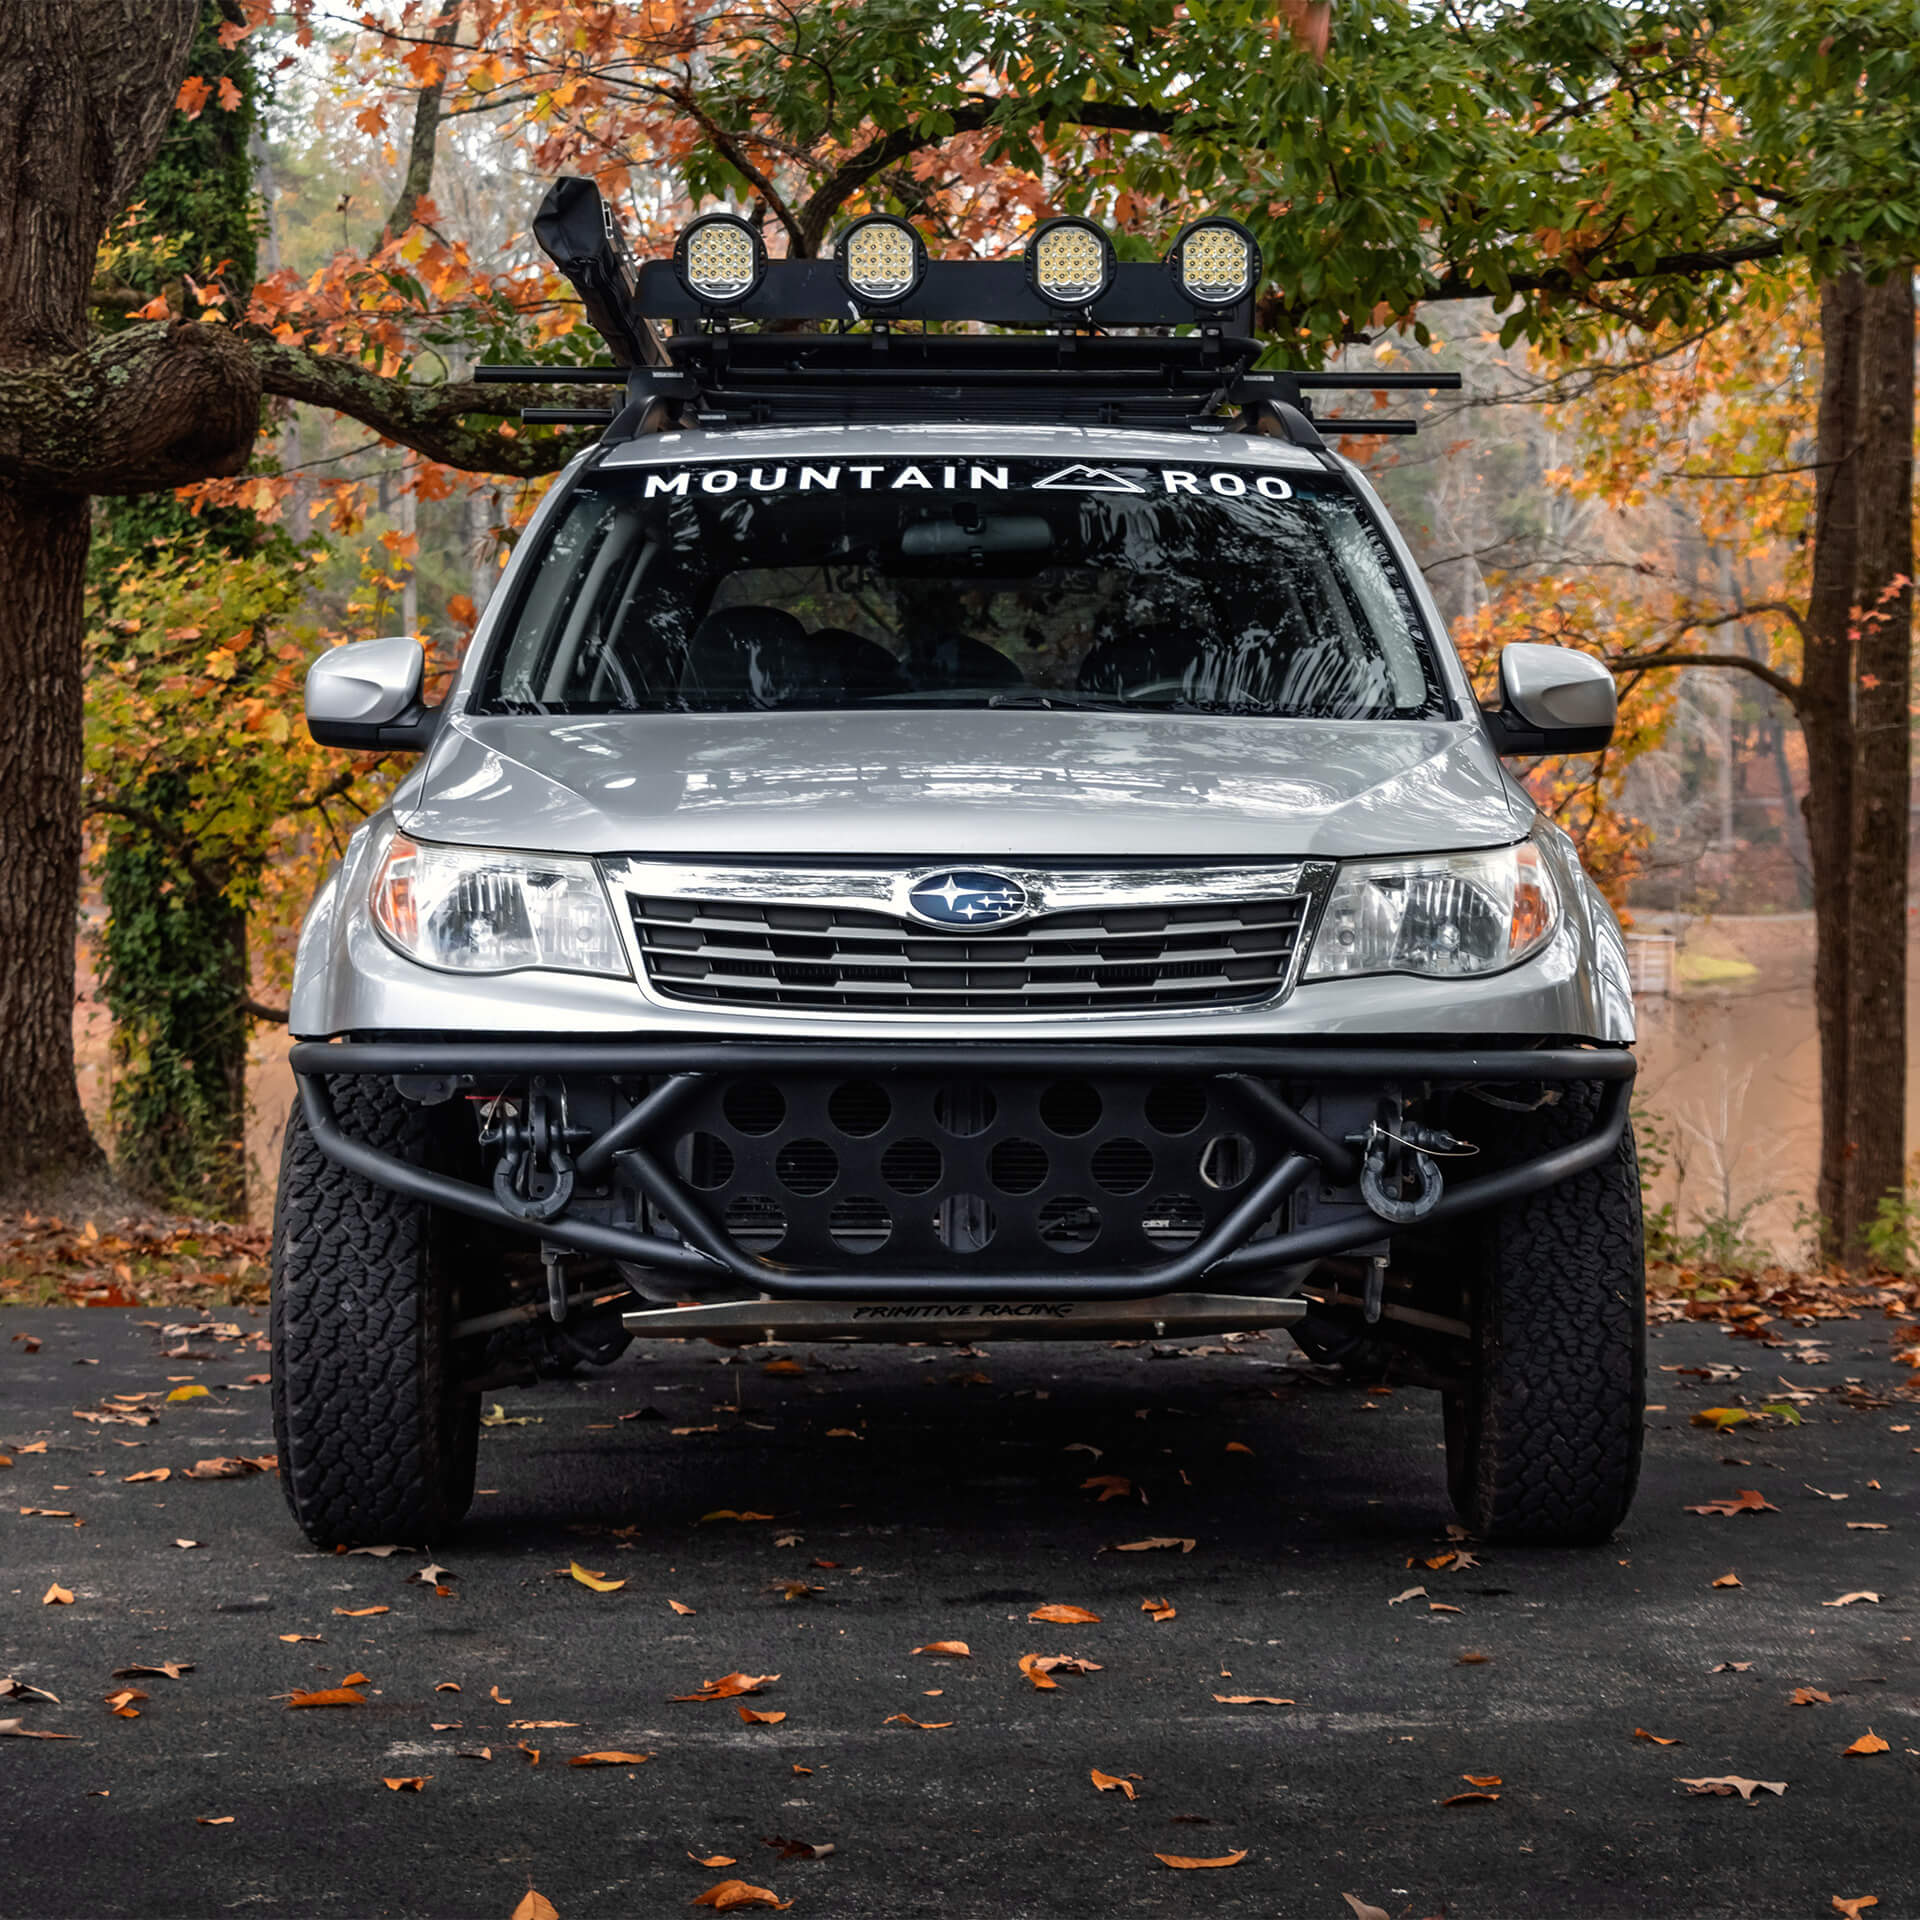 Lifted 2010 Subaru Forester the Source of Enjoyment on